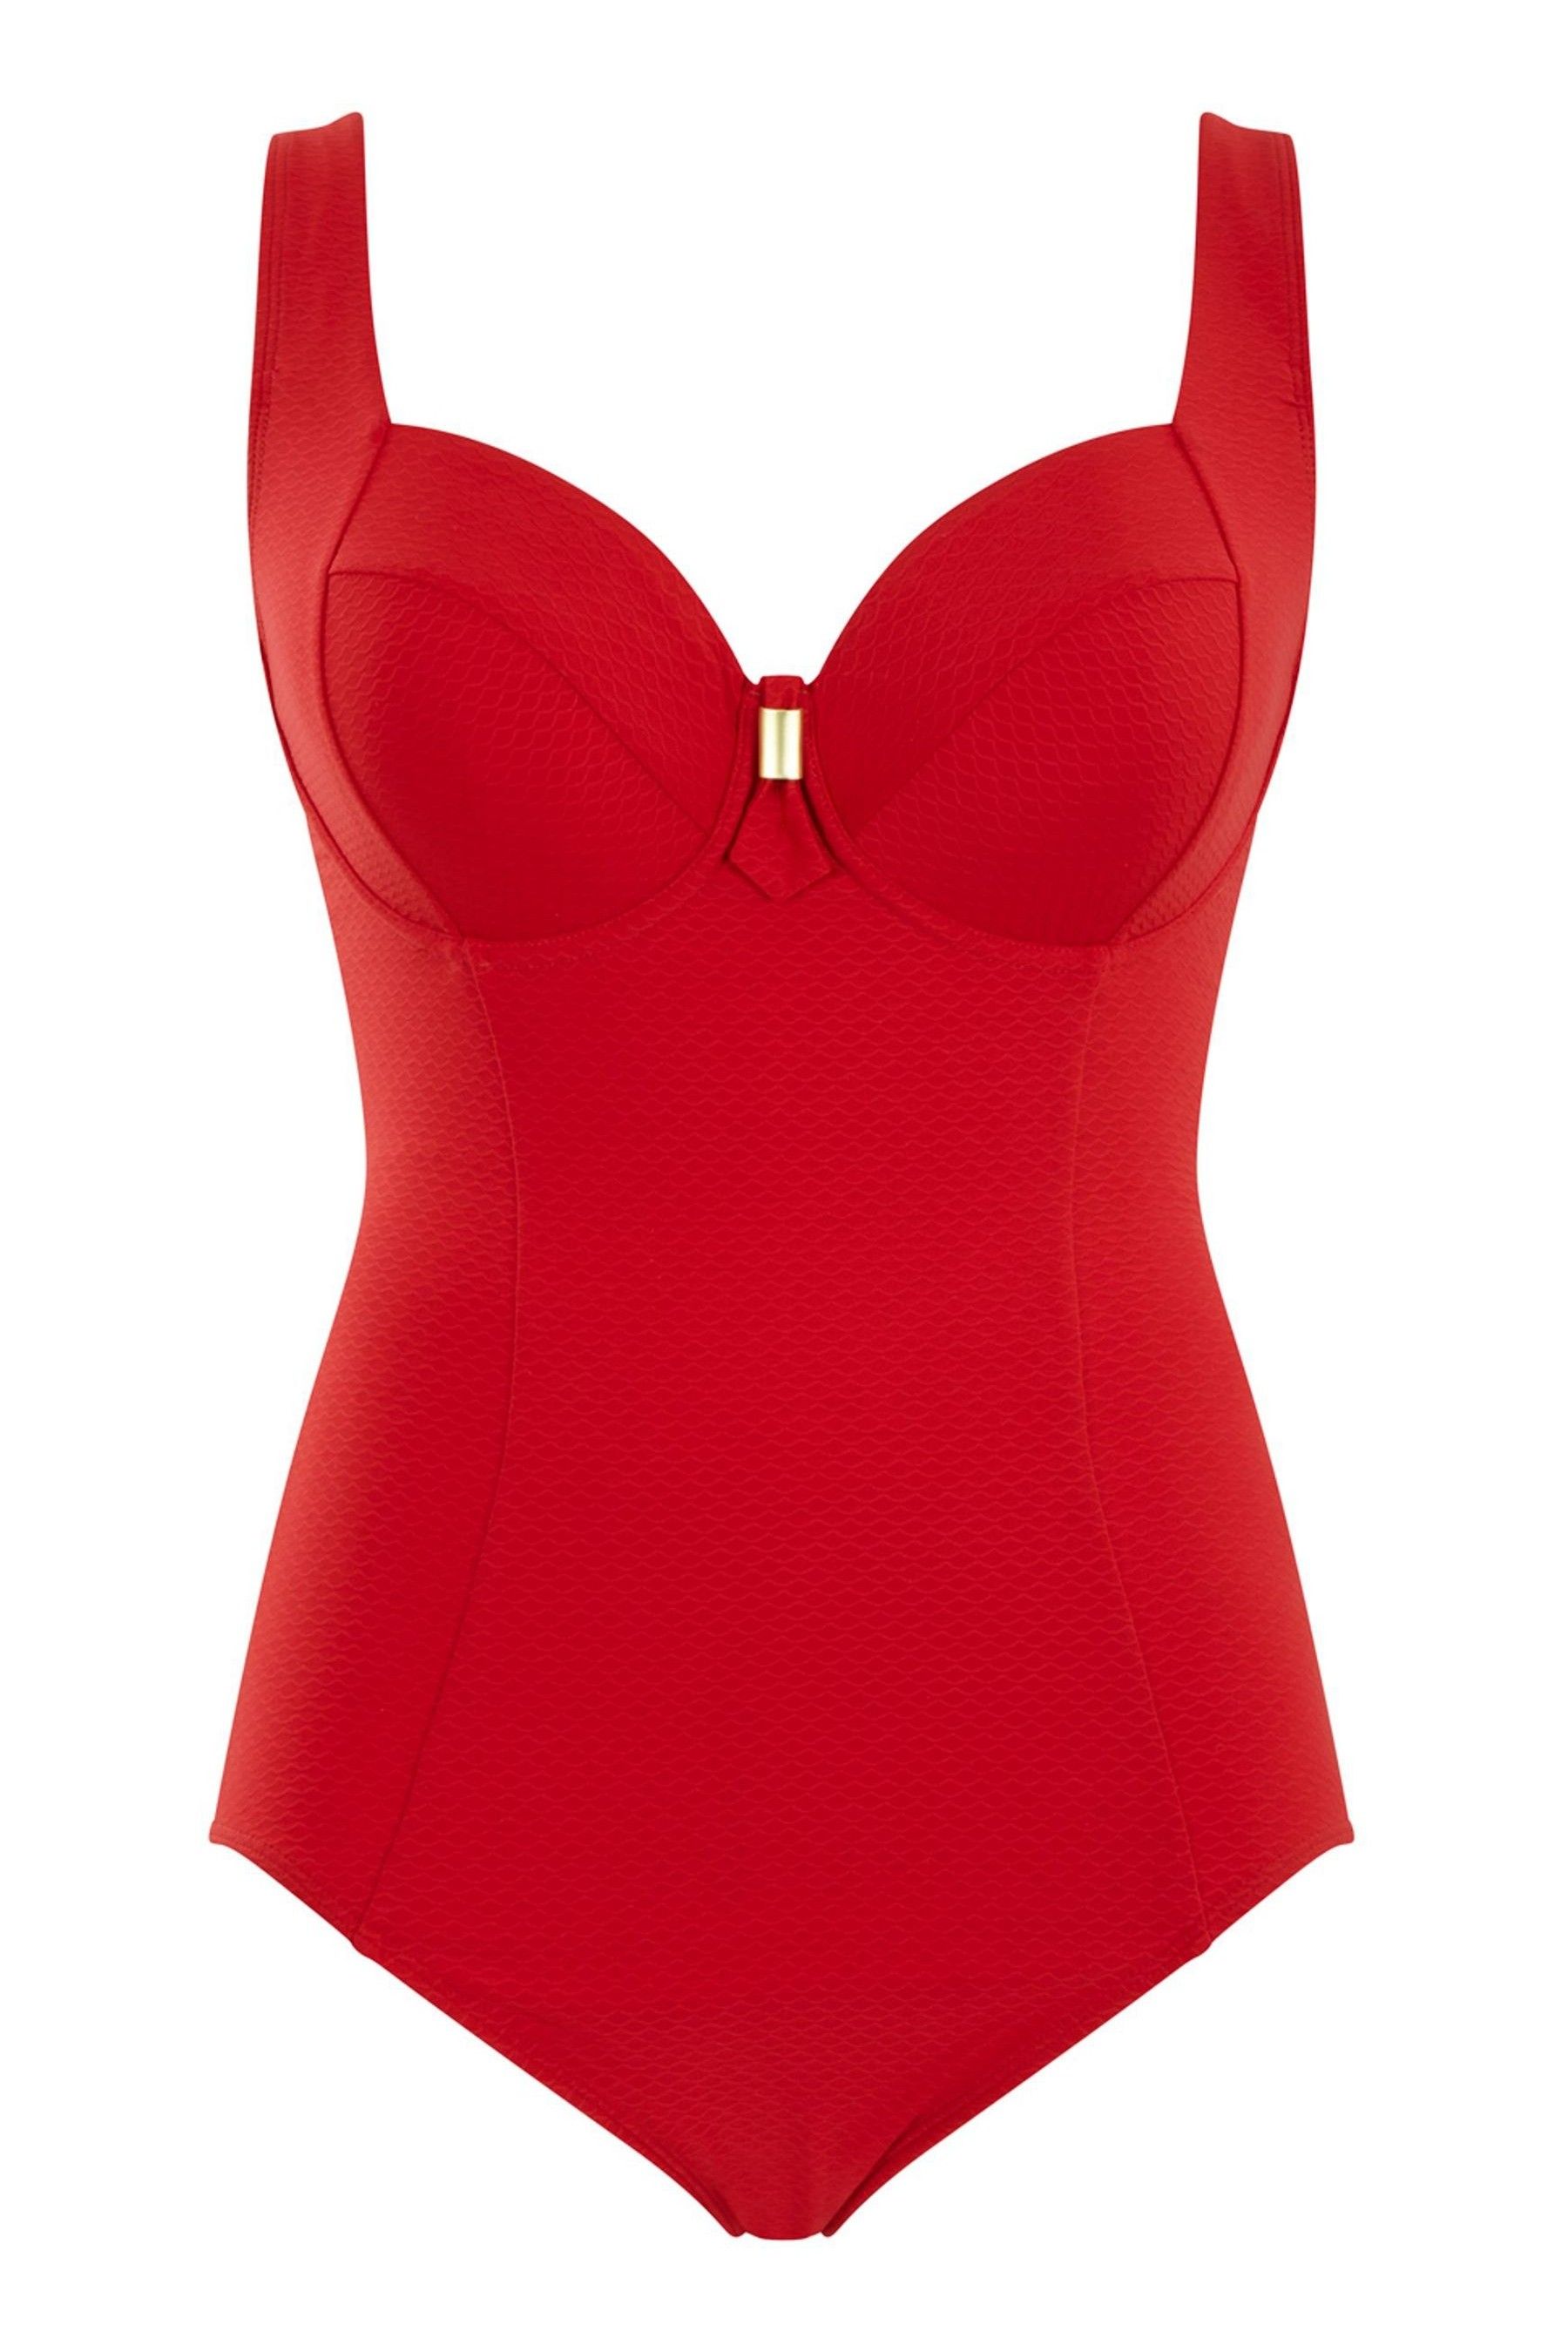 Buy Panache Swim Crimson Red Marianna Balconnet Wired Swimsuit from the ...